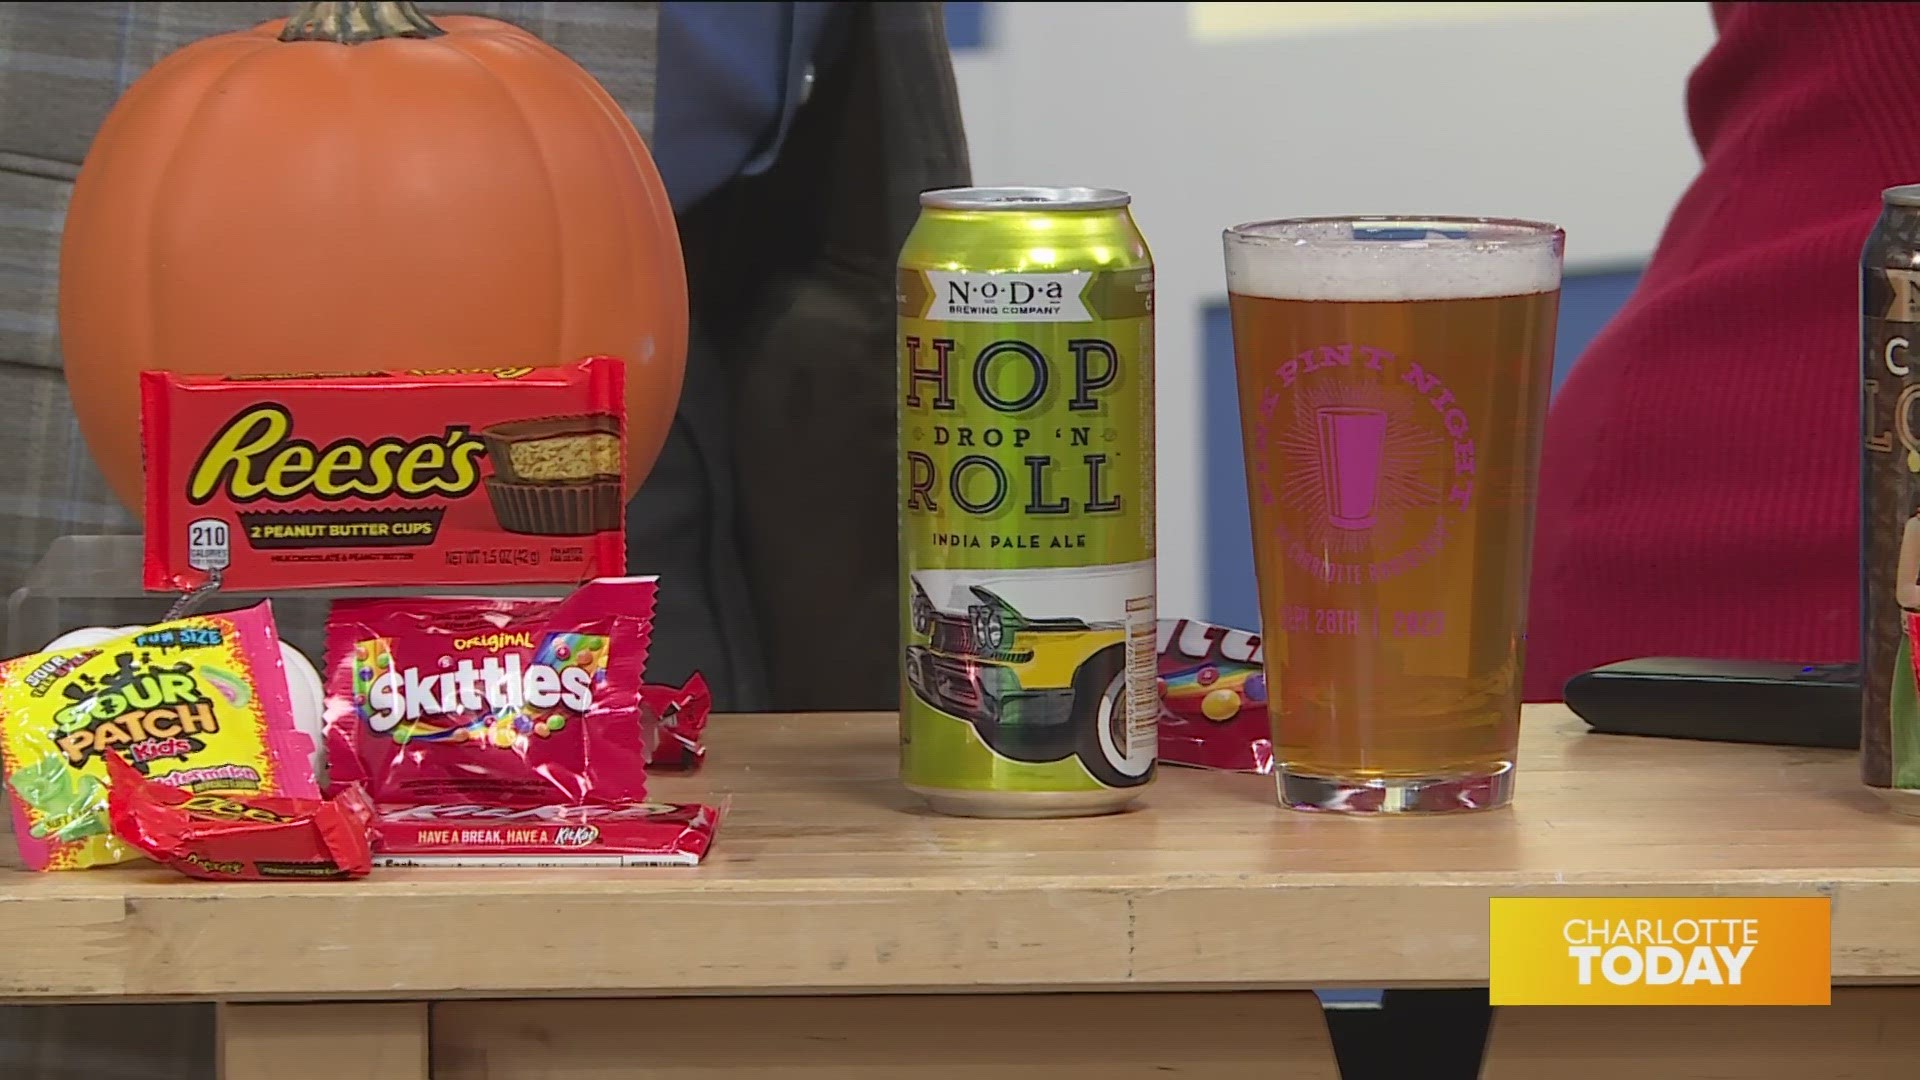 Noda Brewing Company created a list of their beers with candy to go with it